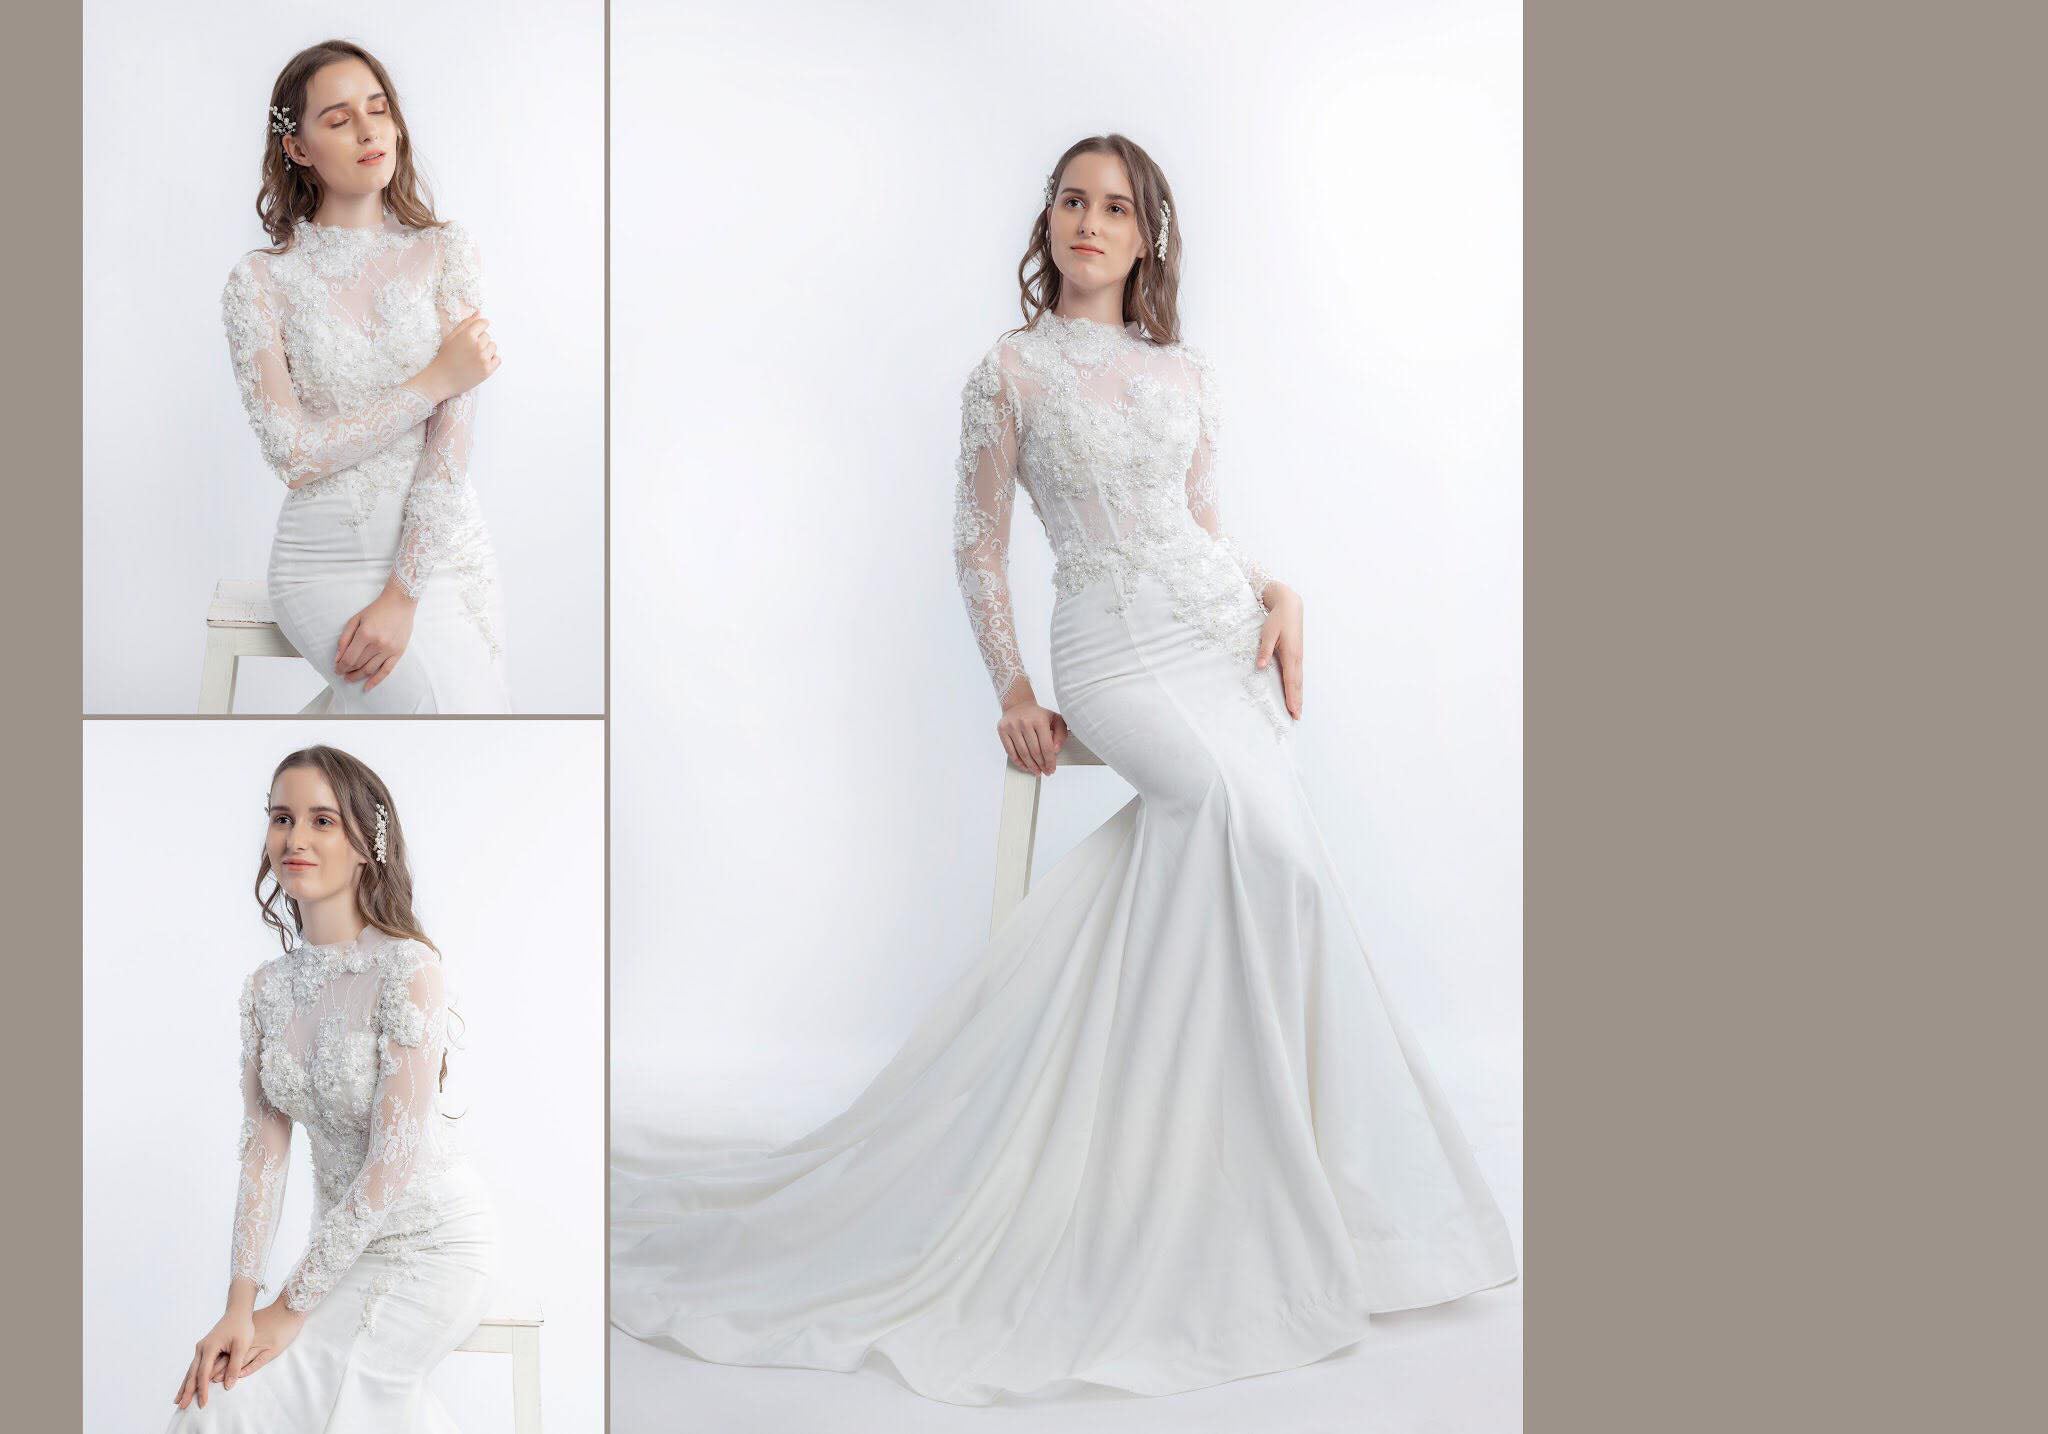 Sparkling Mermaid-Inspired Wedding Dress, Exquisite Corset with High-End 3D Lace Embellishments